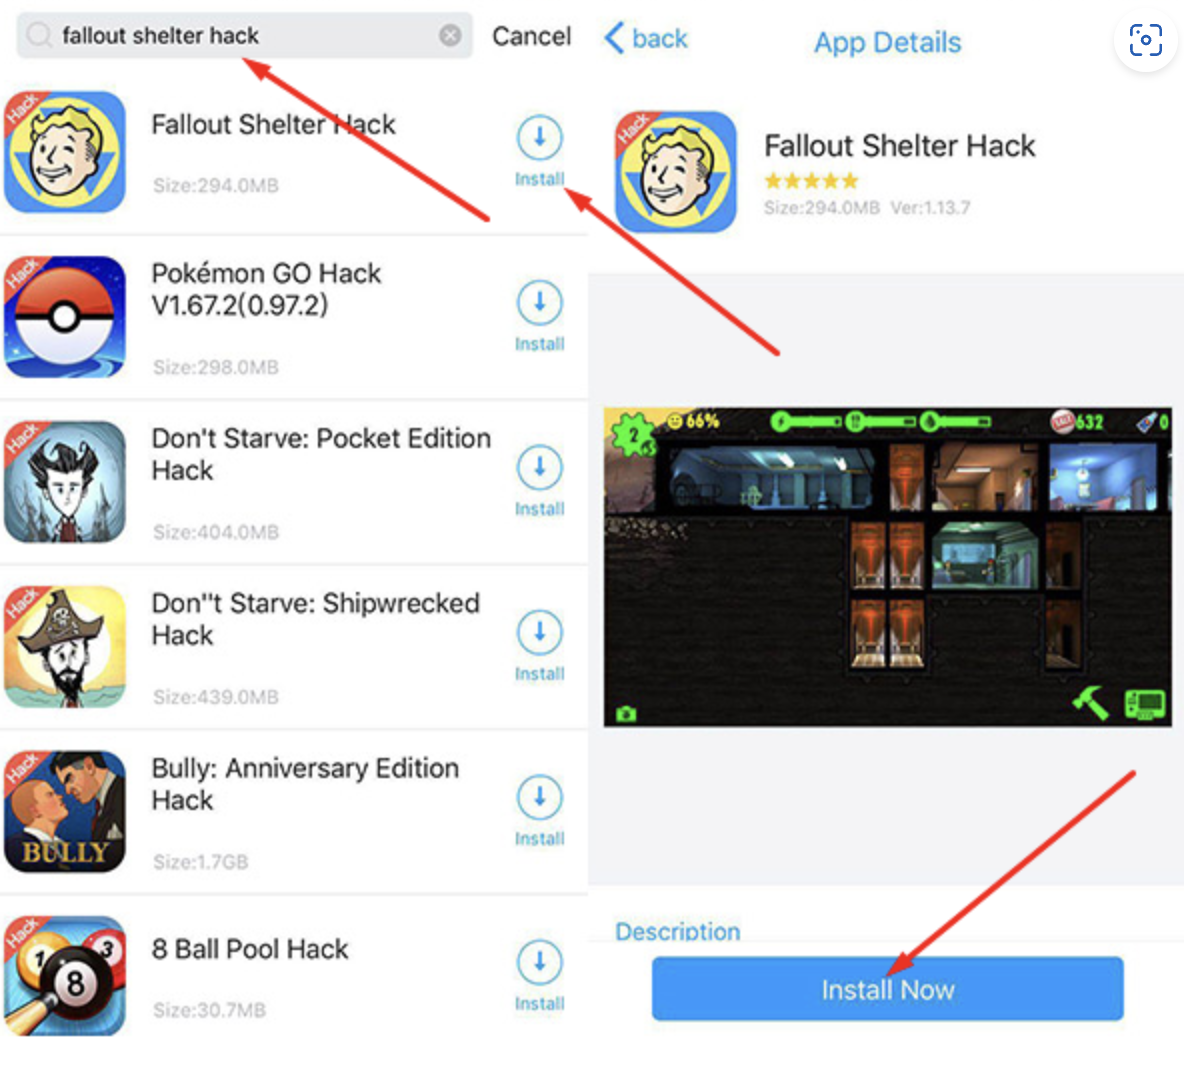 Monitor installation process of Fallout Shelter Game MOD on iOS